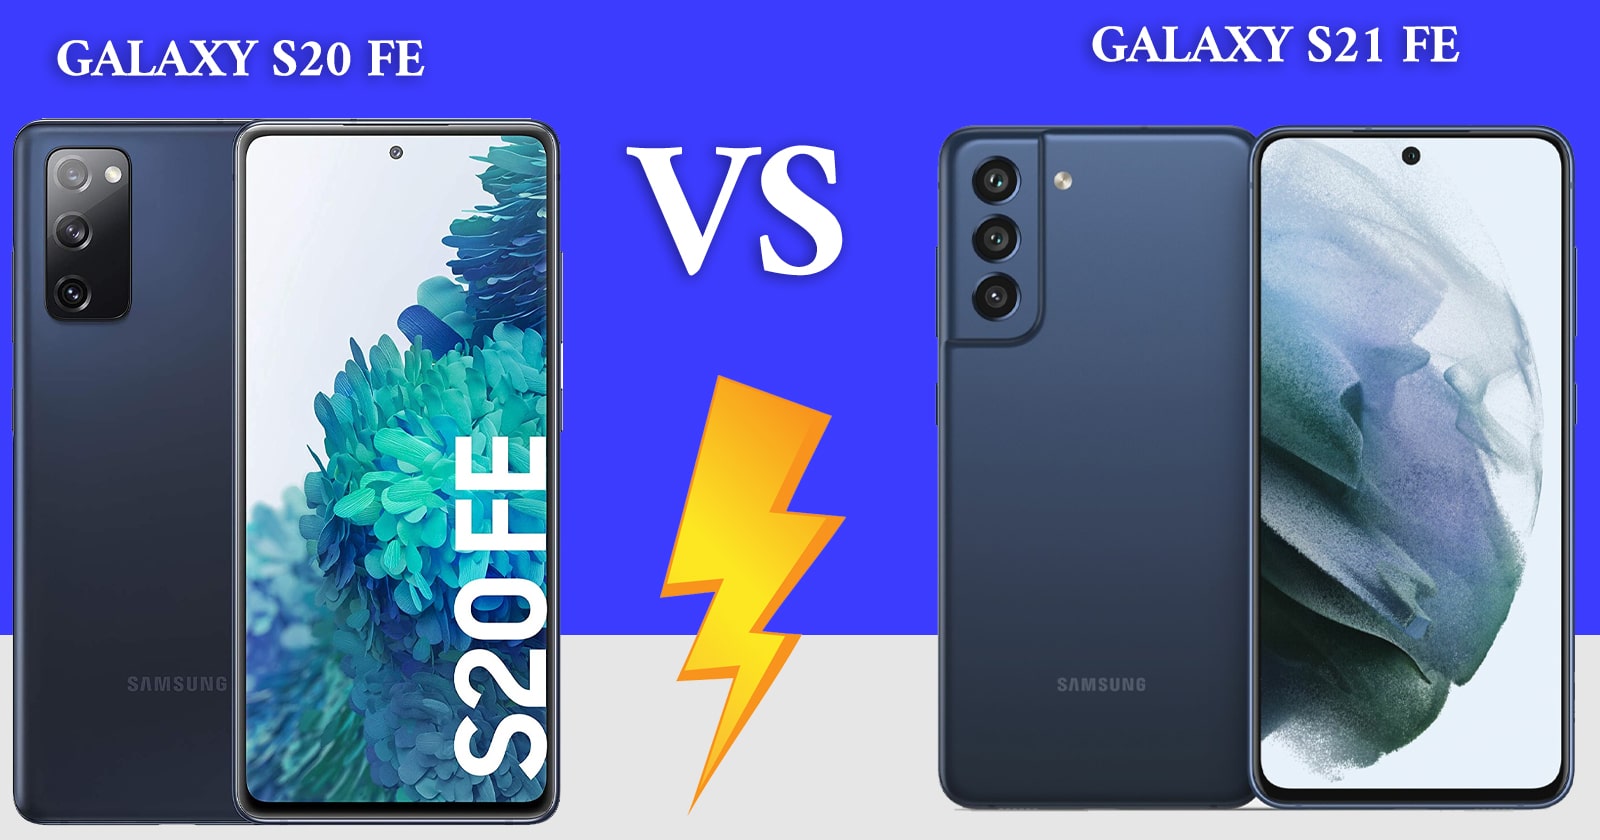 What Is the Difference Between Samsung Galaxy S20 FE and S21 FE